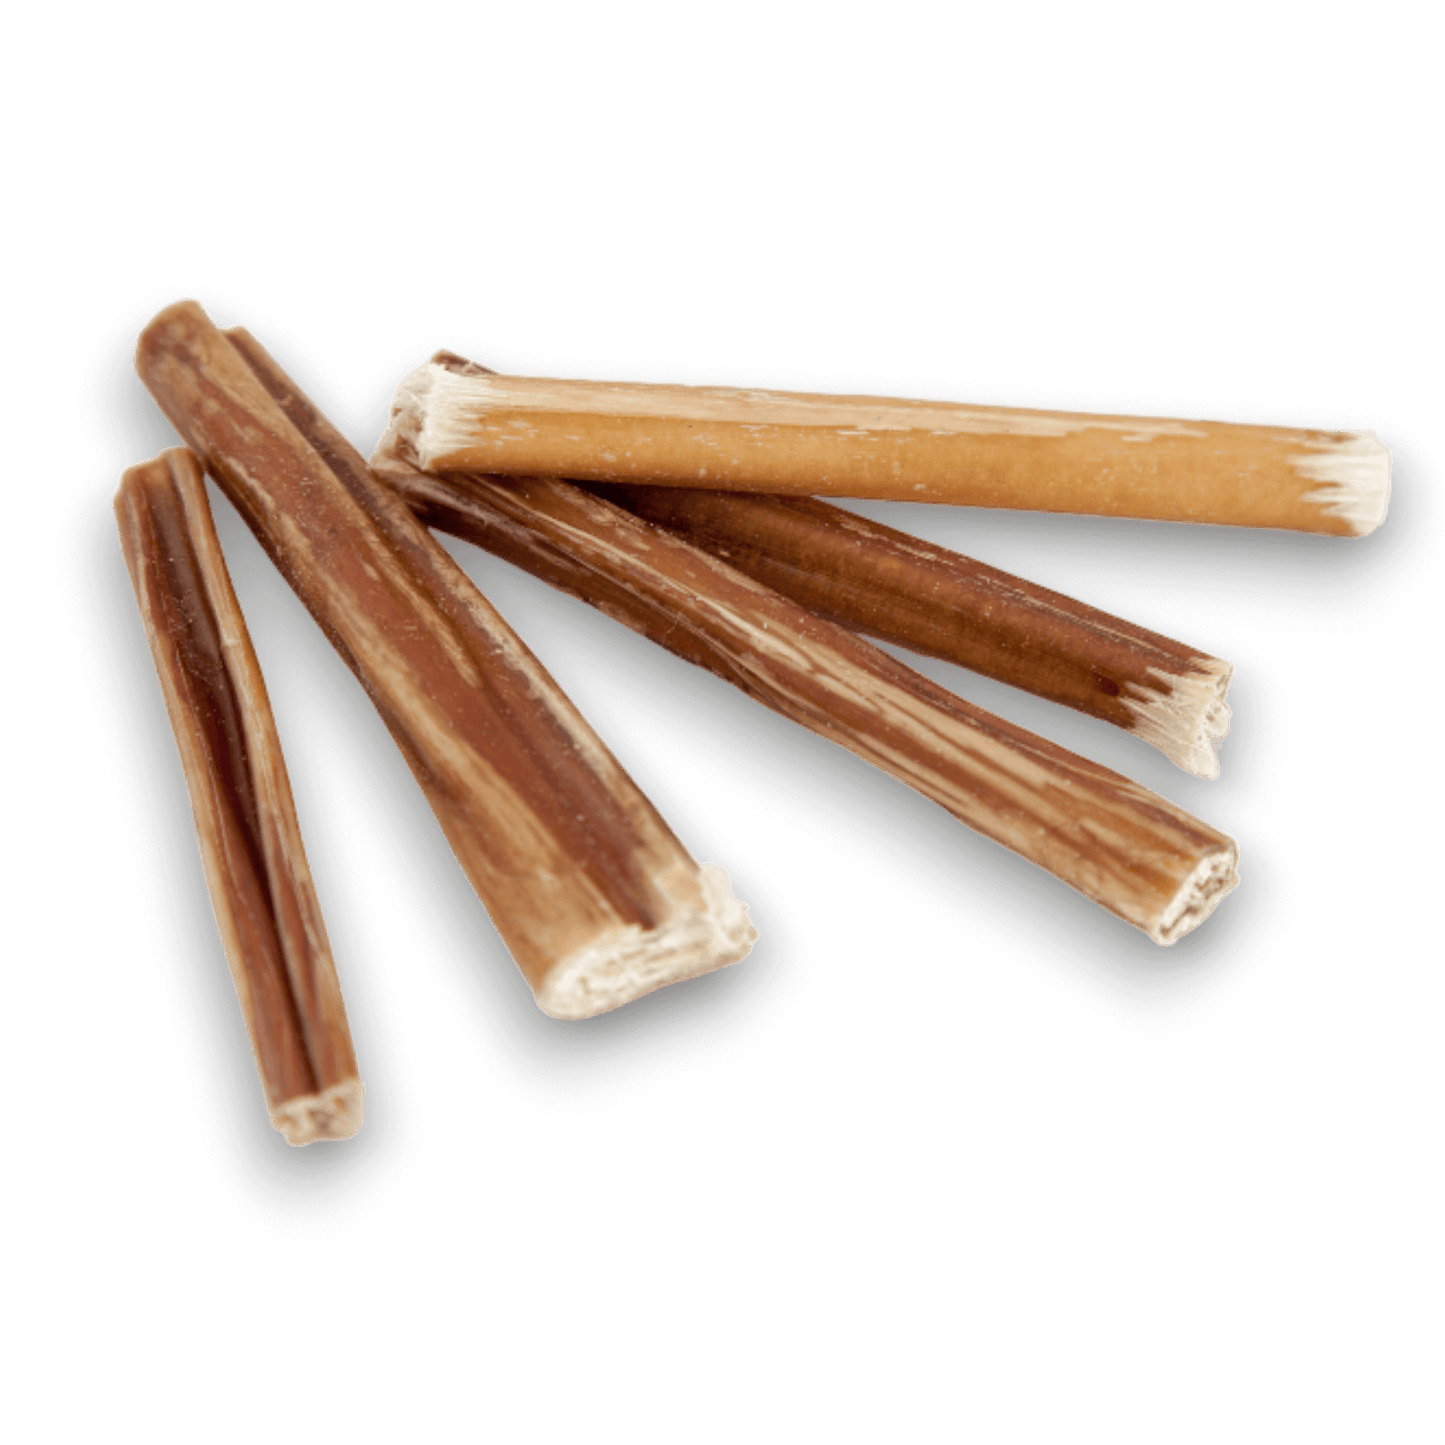 6 inch bully stick dog chews on a transparent background.